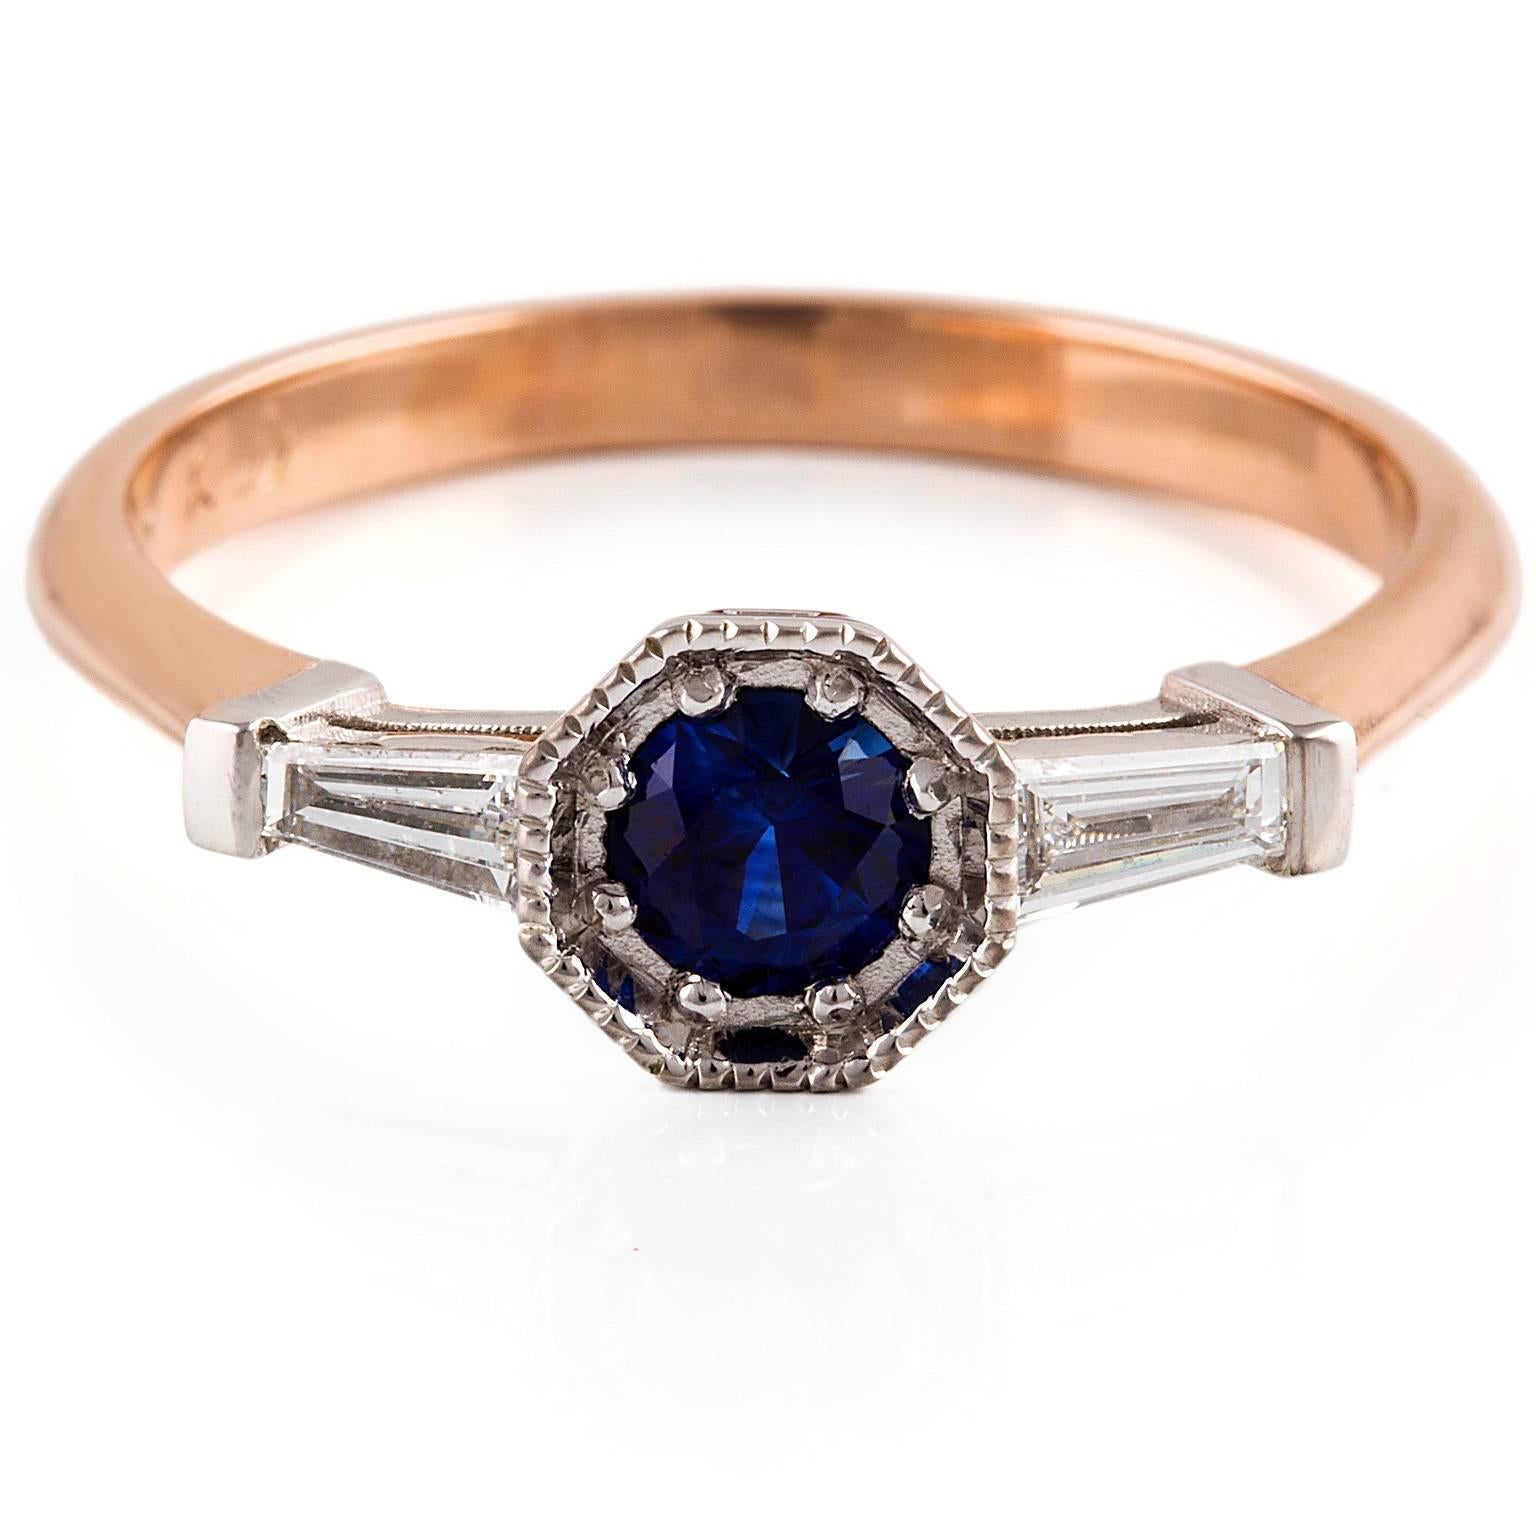 Art Deco Style Dark Zaffiro Ring

With timeless appeal, this elegant Art Deco Style ring is set with a stunning Ceylon Sapphire and tapered baguette diamonds. The white gold setting has lovely milgrain detailing and the band is made of rose gold.